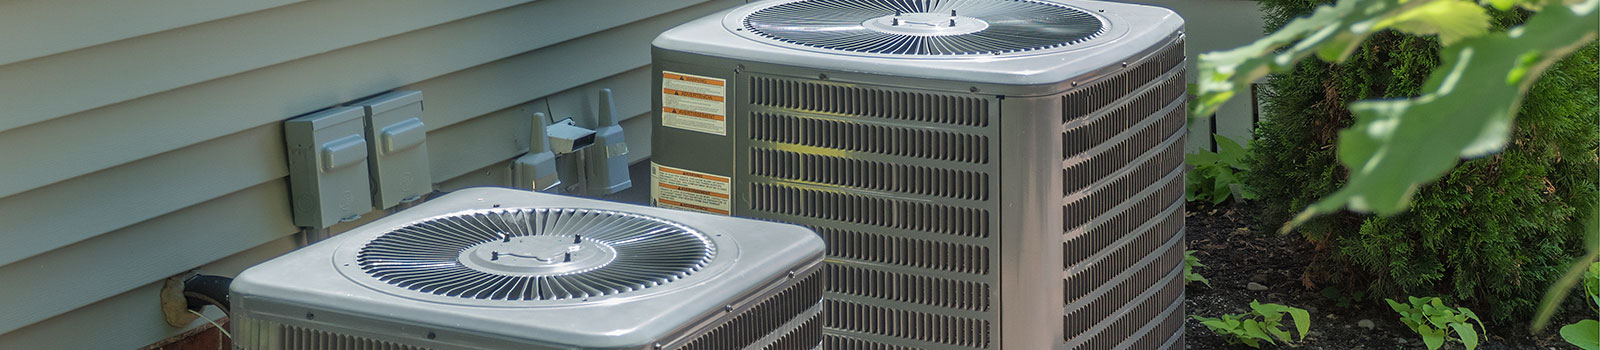 Heat Pumps and air conditioning service and installation